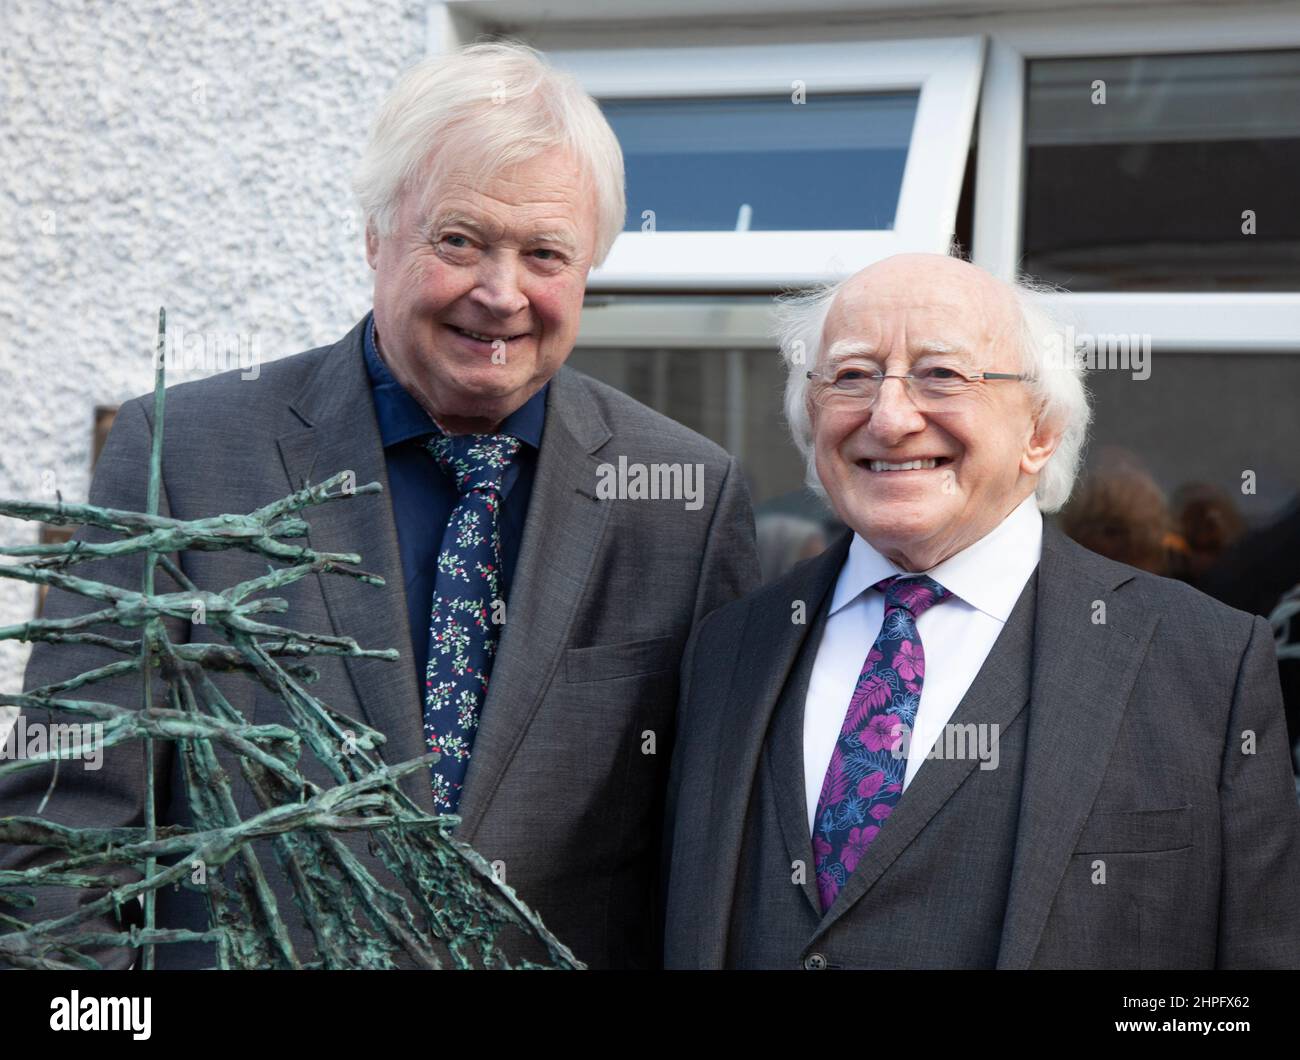 Sculptor John Behan and President of Ireland Michael Higgins at the opening of a Behan exhibition at the Kilcock Gallery, Ireland Stock Photo